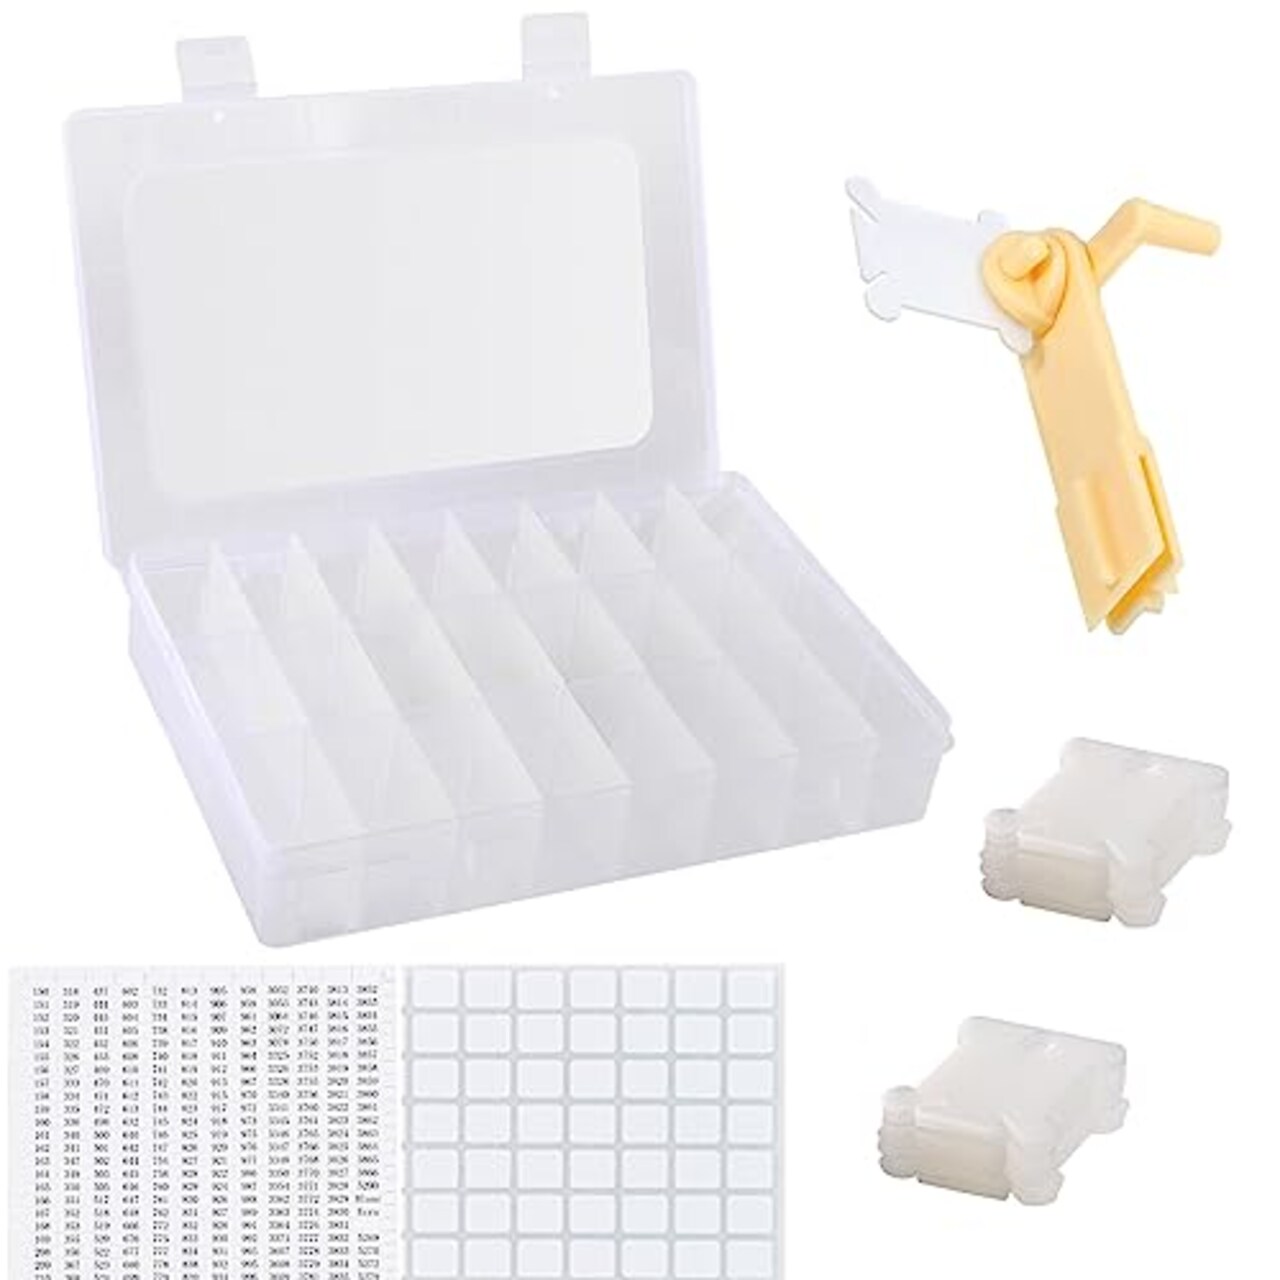 Embroidery Floss Organizer, Cross Stitch Thread Storage Box Tools - Bobbin  Winder, 1 Removable 24 Compartments with 40 Hard Plastic Floss Bobbins and  Stickers for Craft DIY Embroidery Sewing Storage